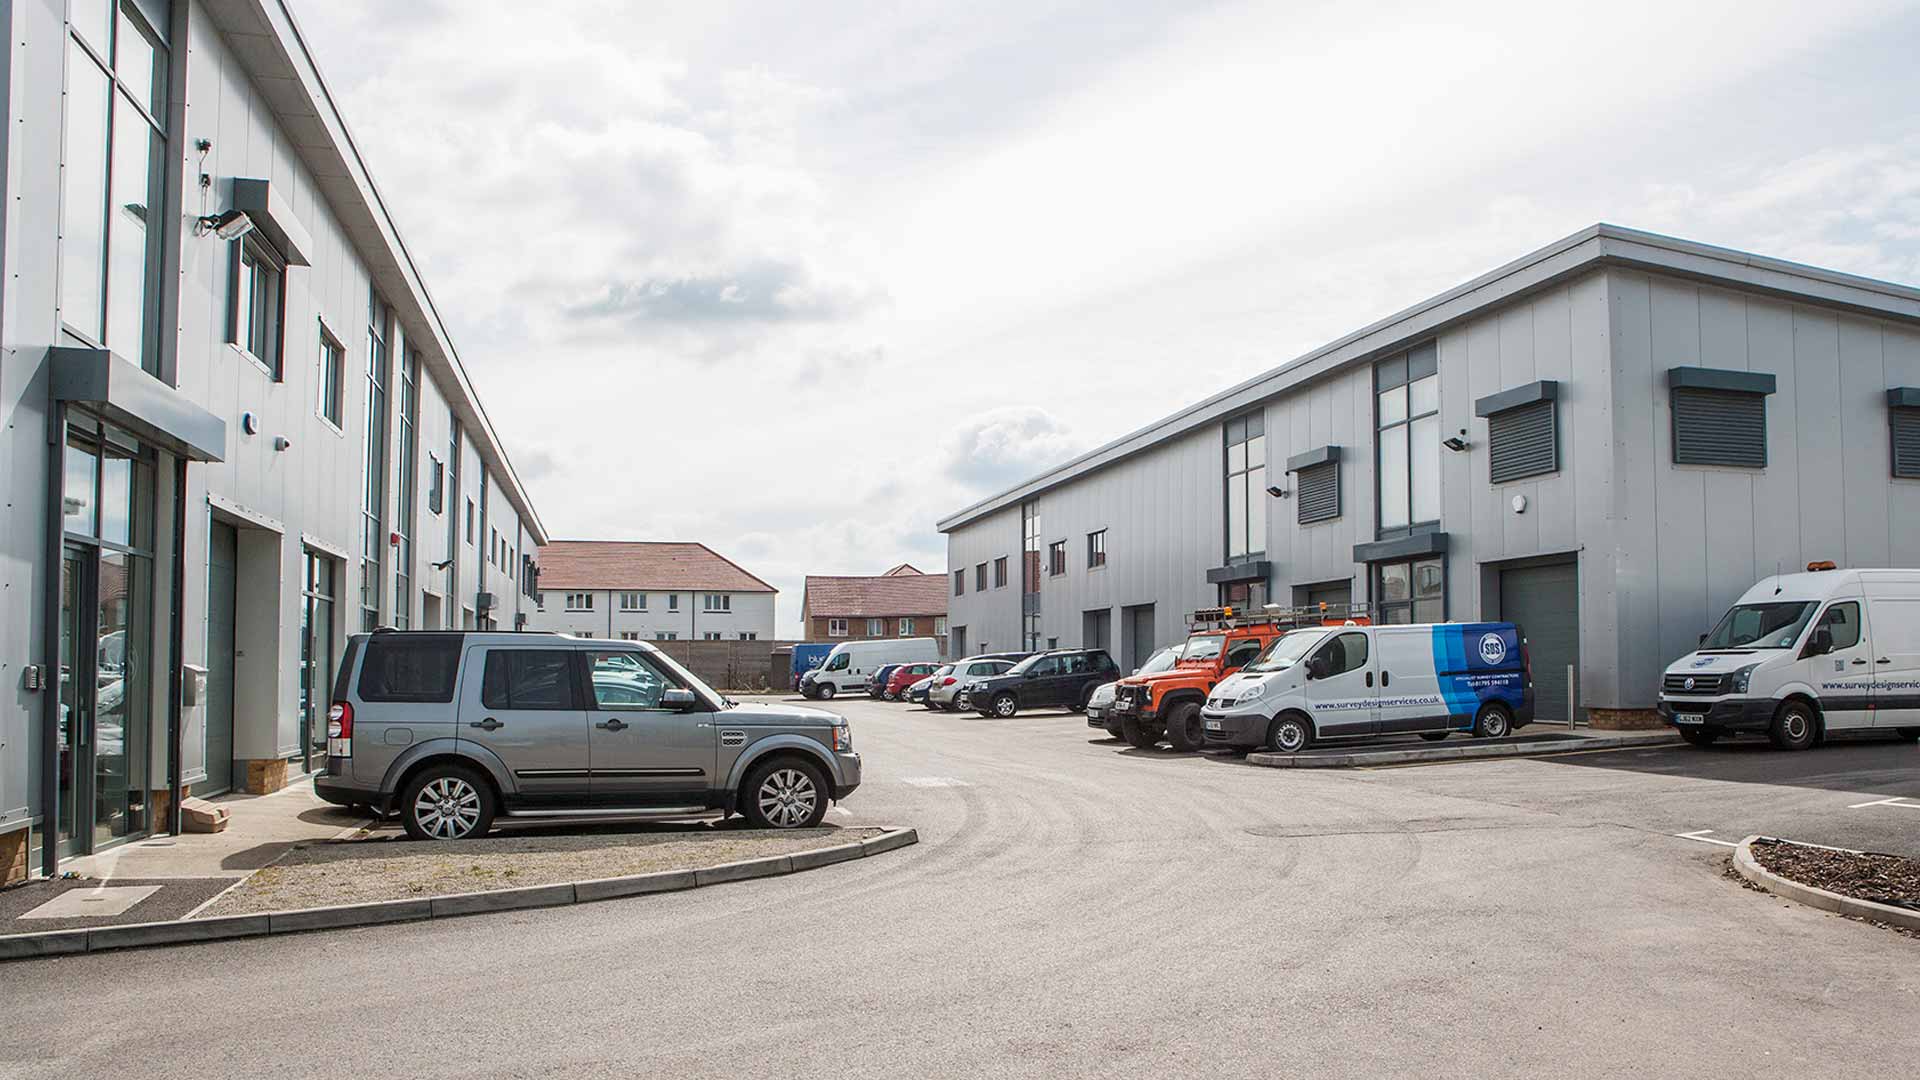 Faversham Foundry Business Park commercial units and estate roads in Faversham.